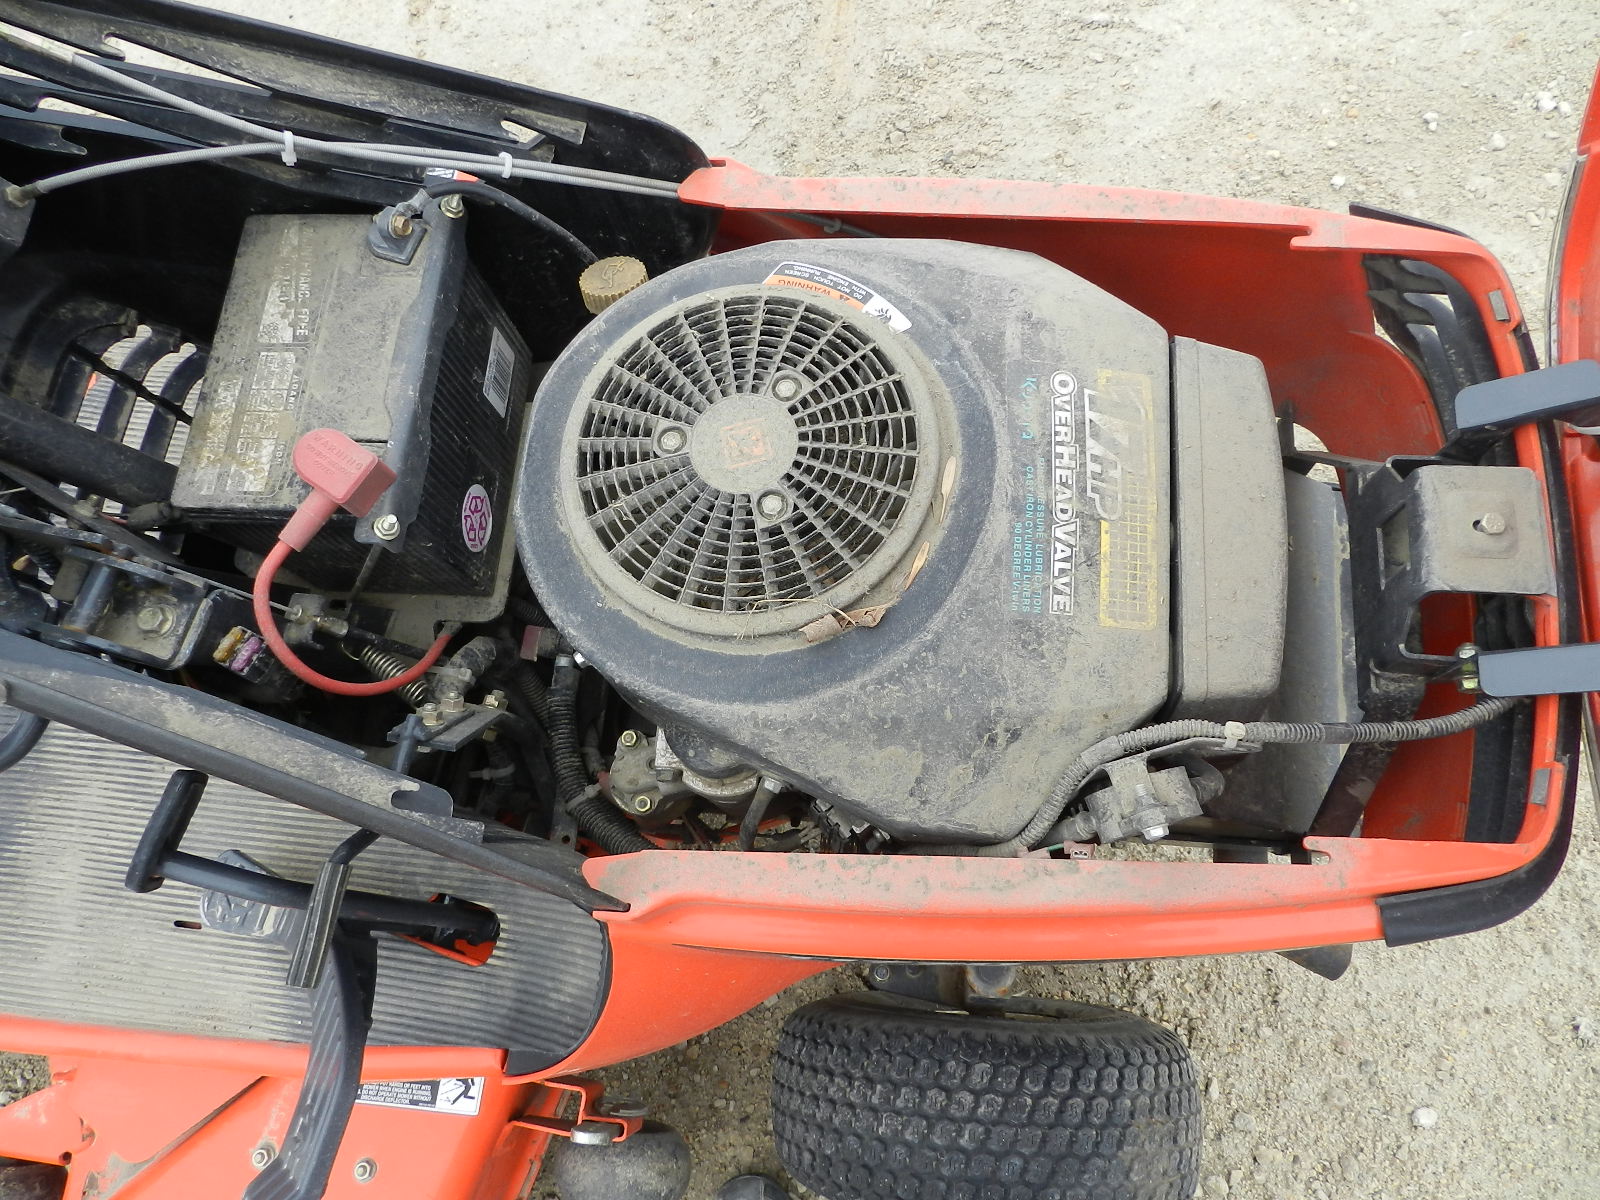 Kubota T1770 17HP Lawn Tractor | Penner Auction Sales Ltd.